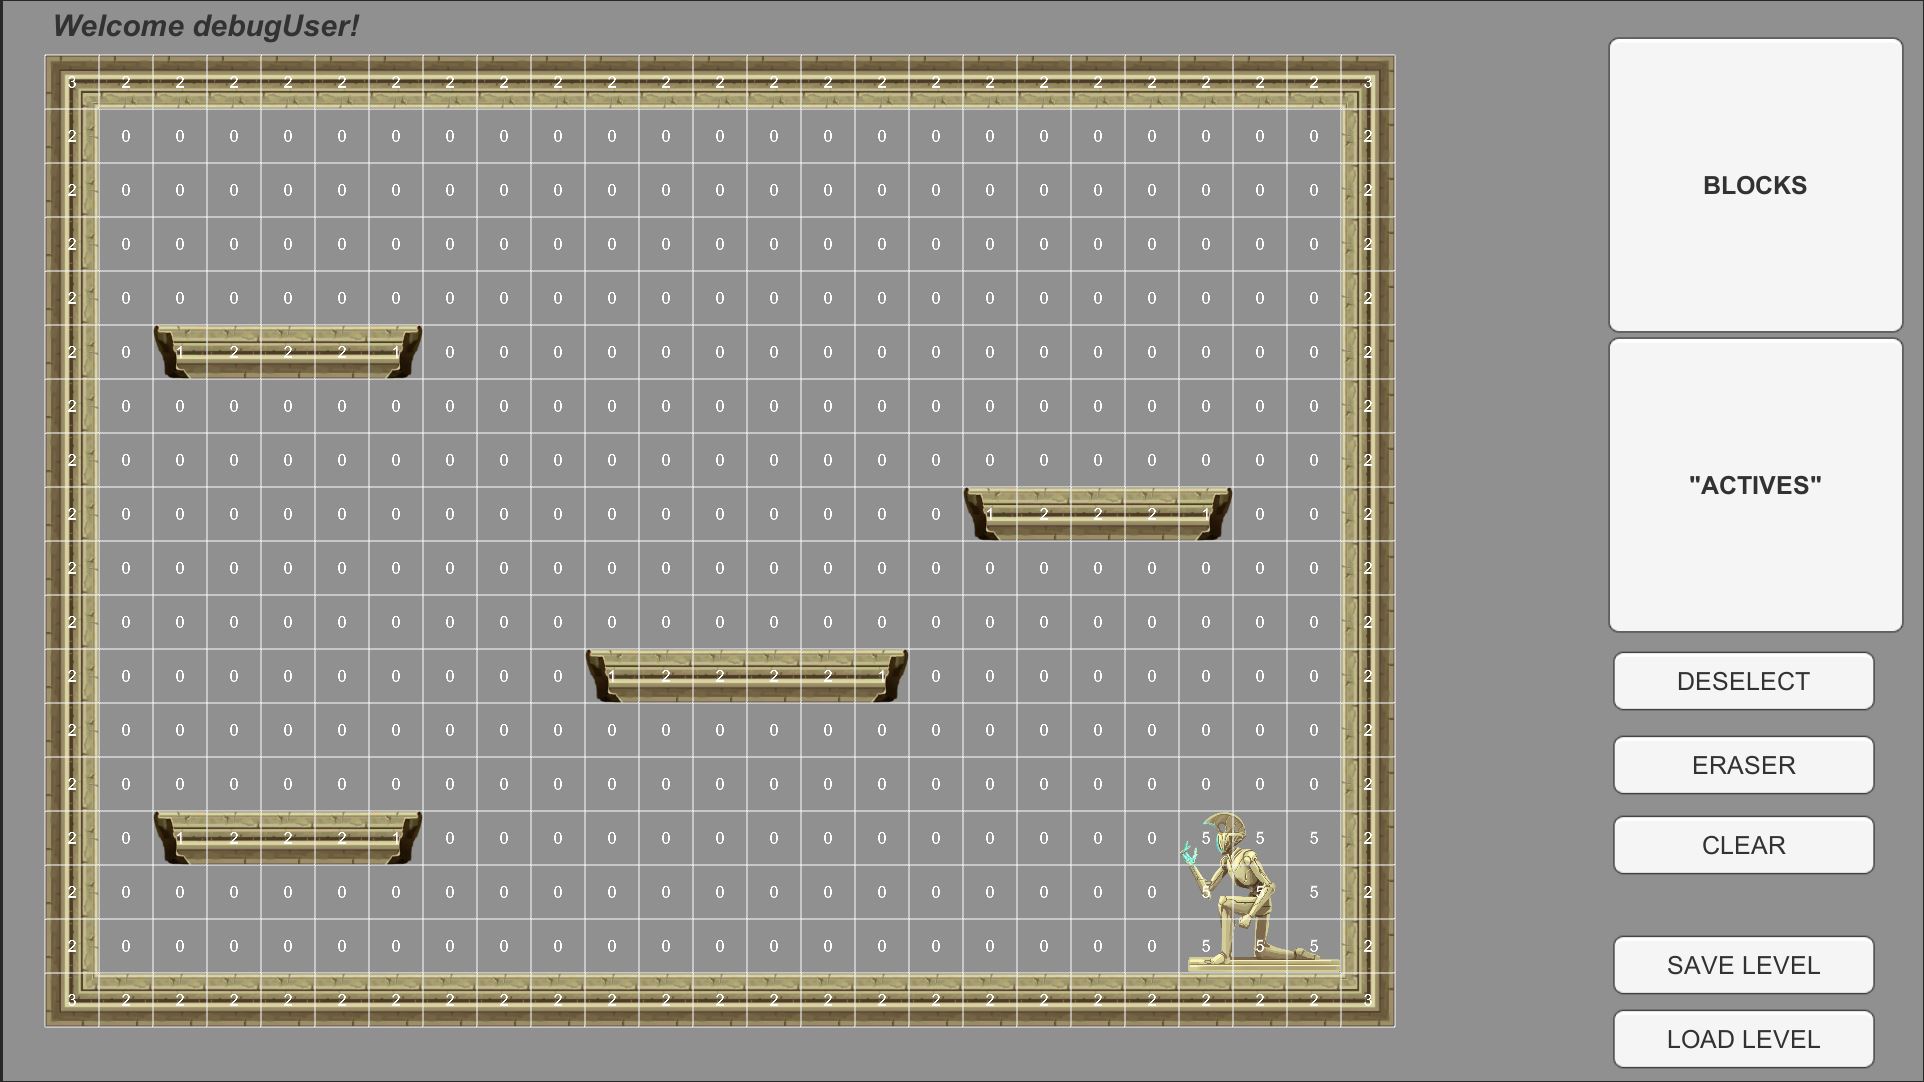 Thumbnail of Level Editor project